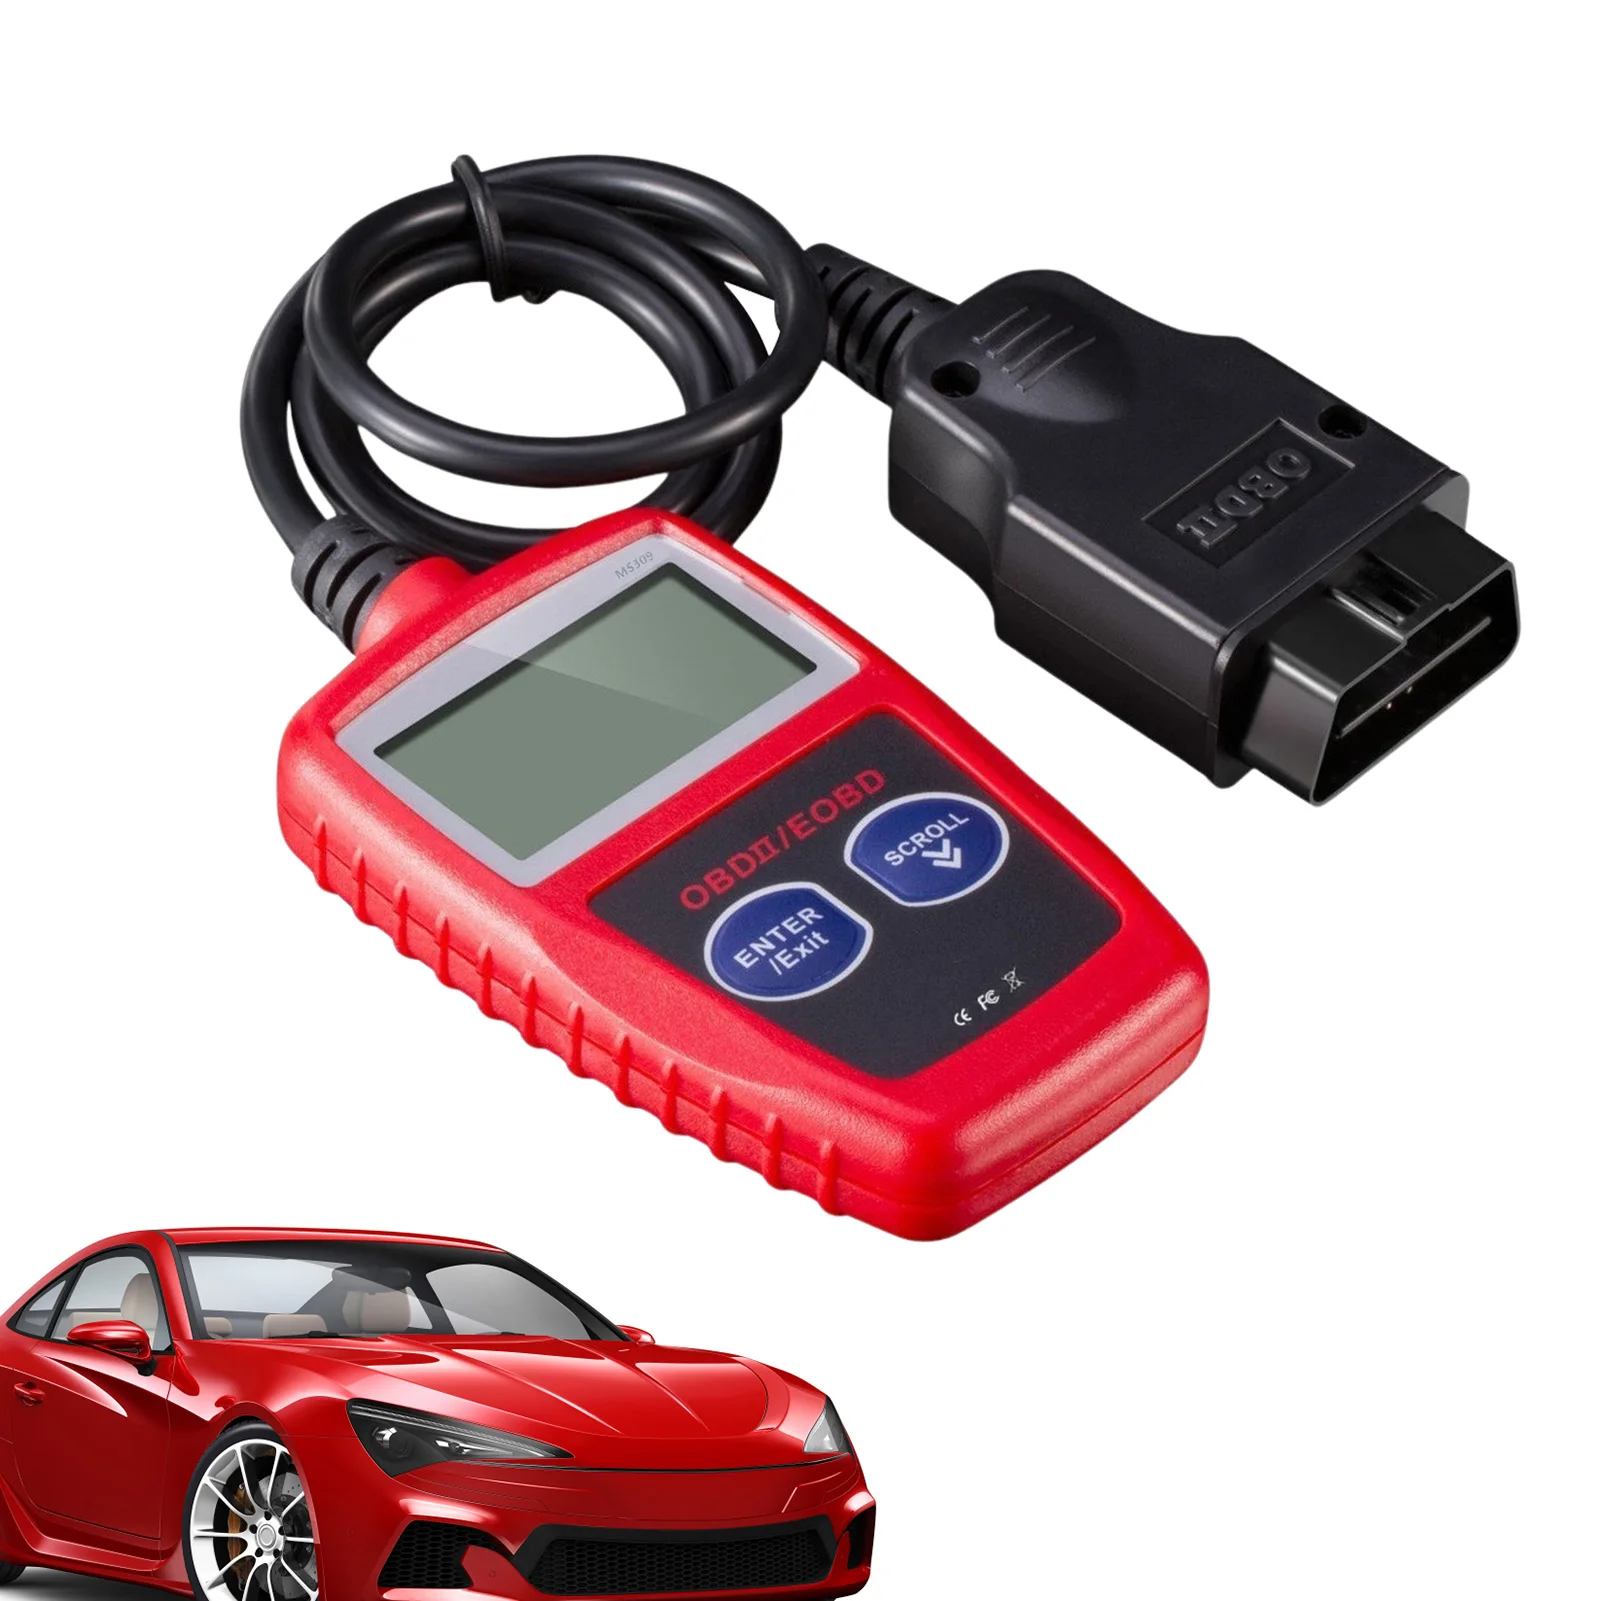 

OBD2 Scanner Diagnostic Tool Engine Fault Code Reader Check Emission Monitor Status CAN-BUS Diagnostic Scan Tool For All OBD II